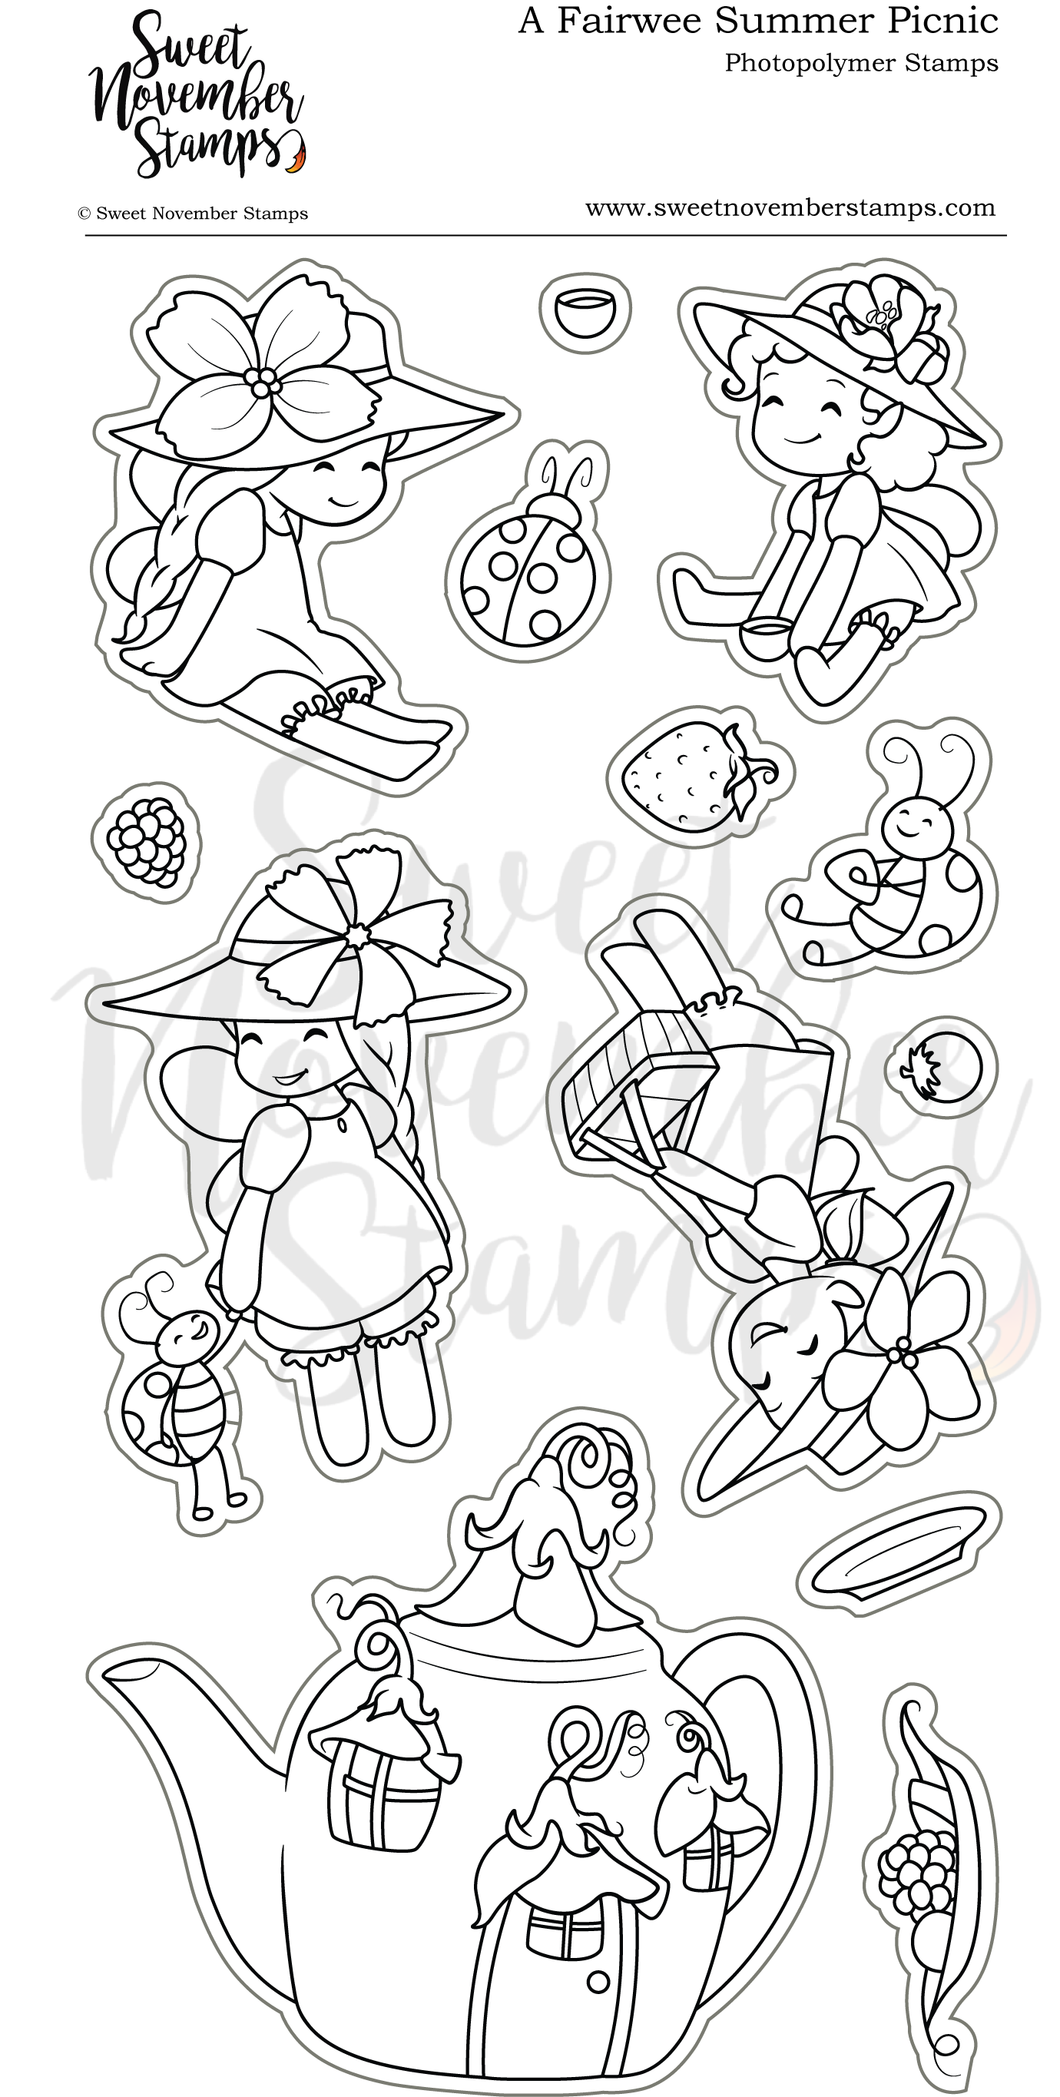 Clear Stamp Set - A Fairwee Summer Picnic